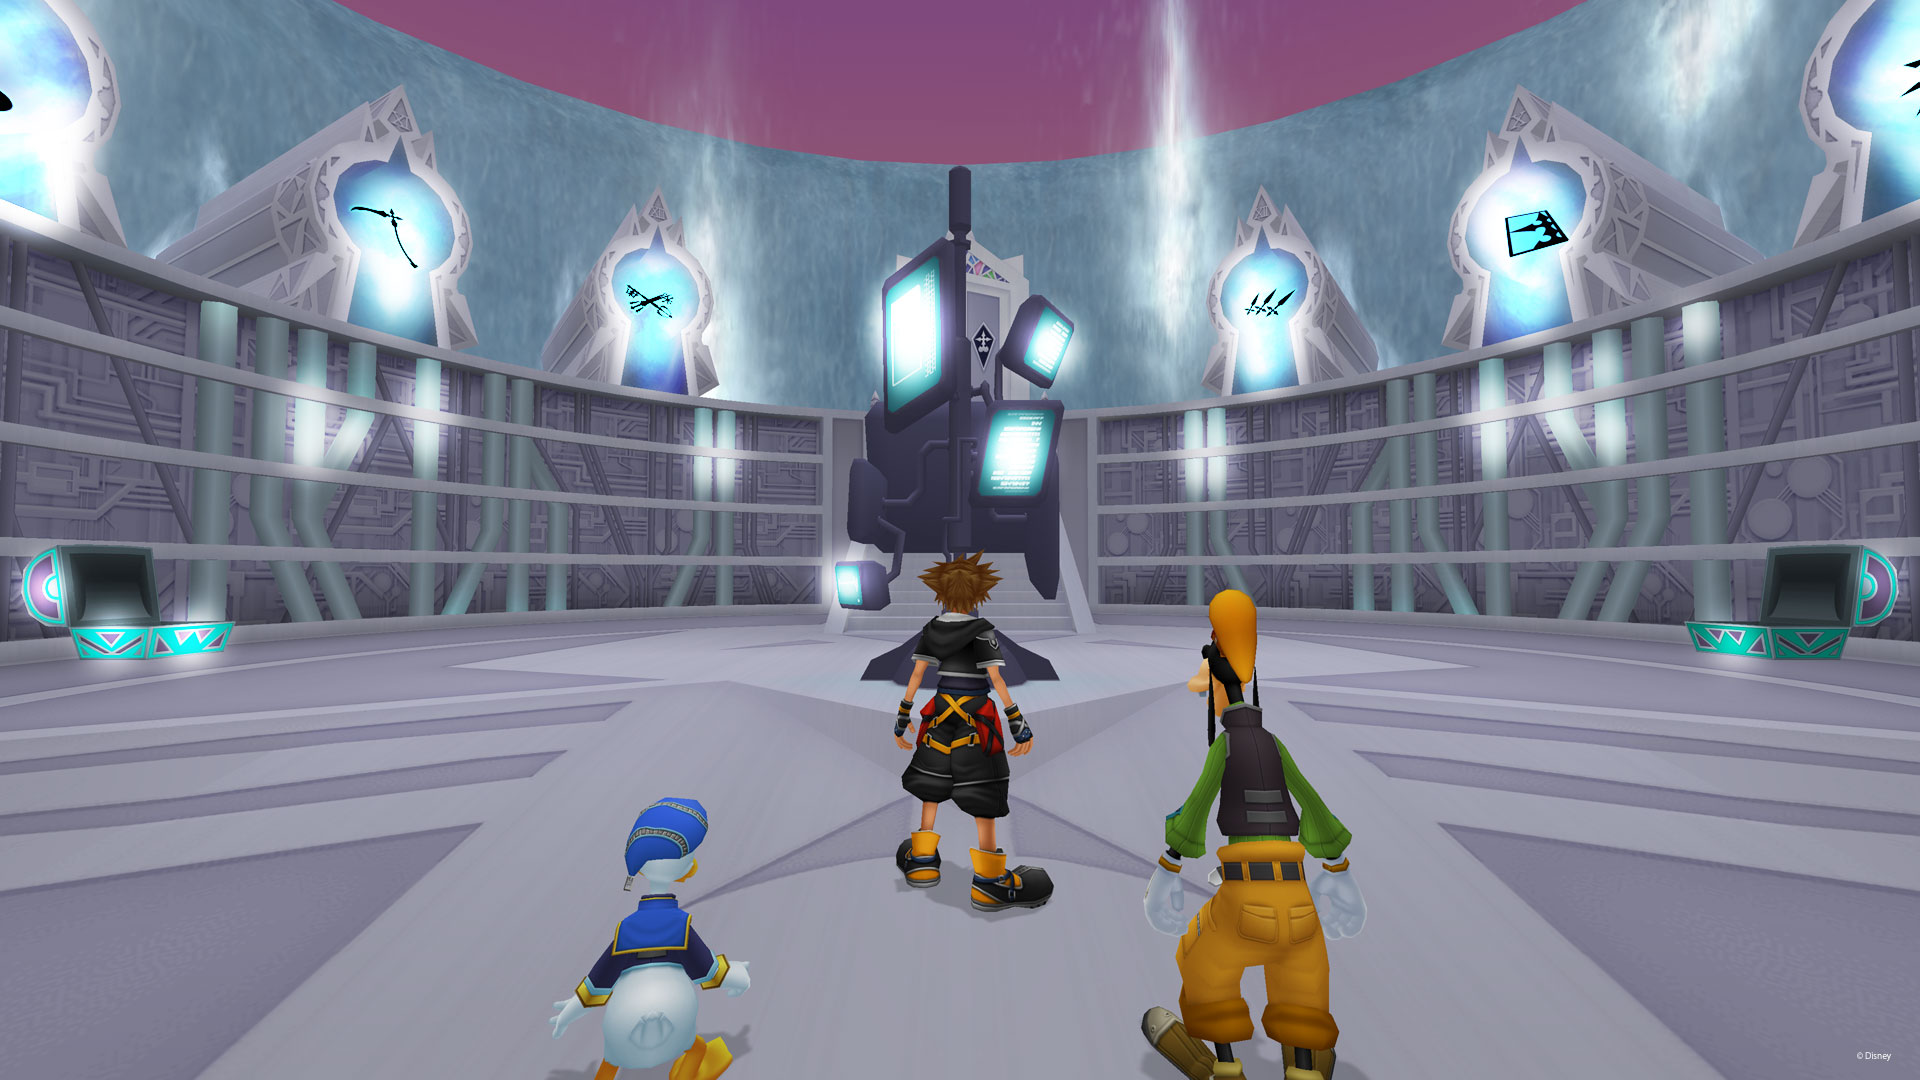 download kingdom hearts hd 1.5 for free